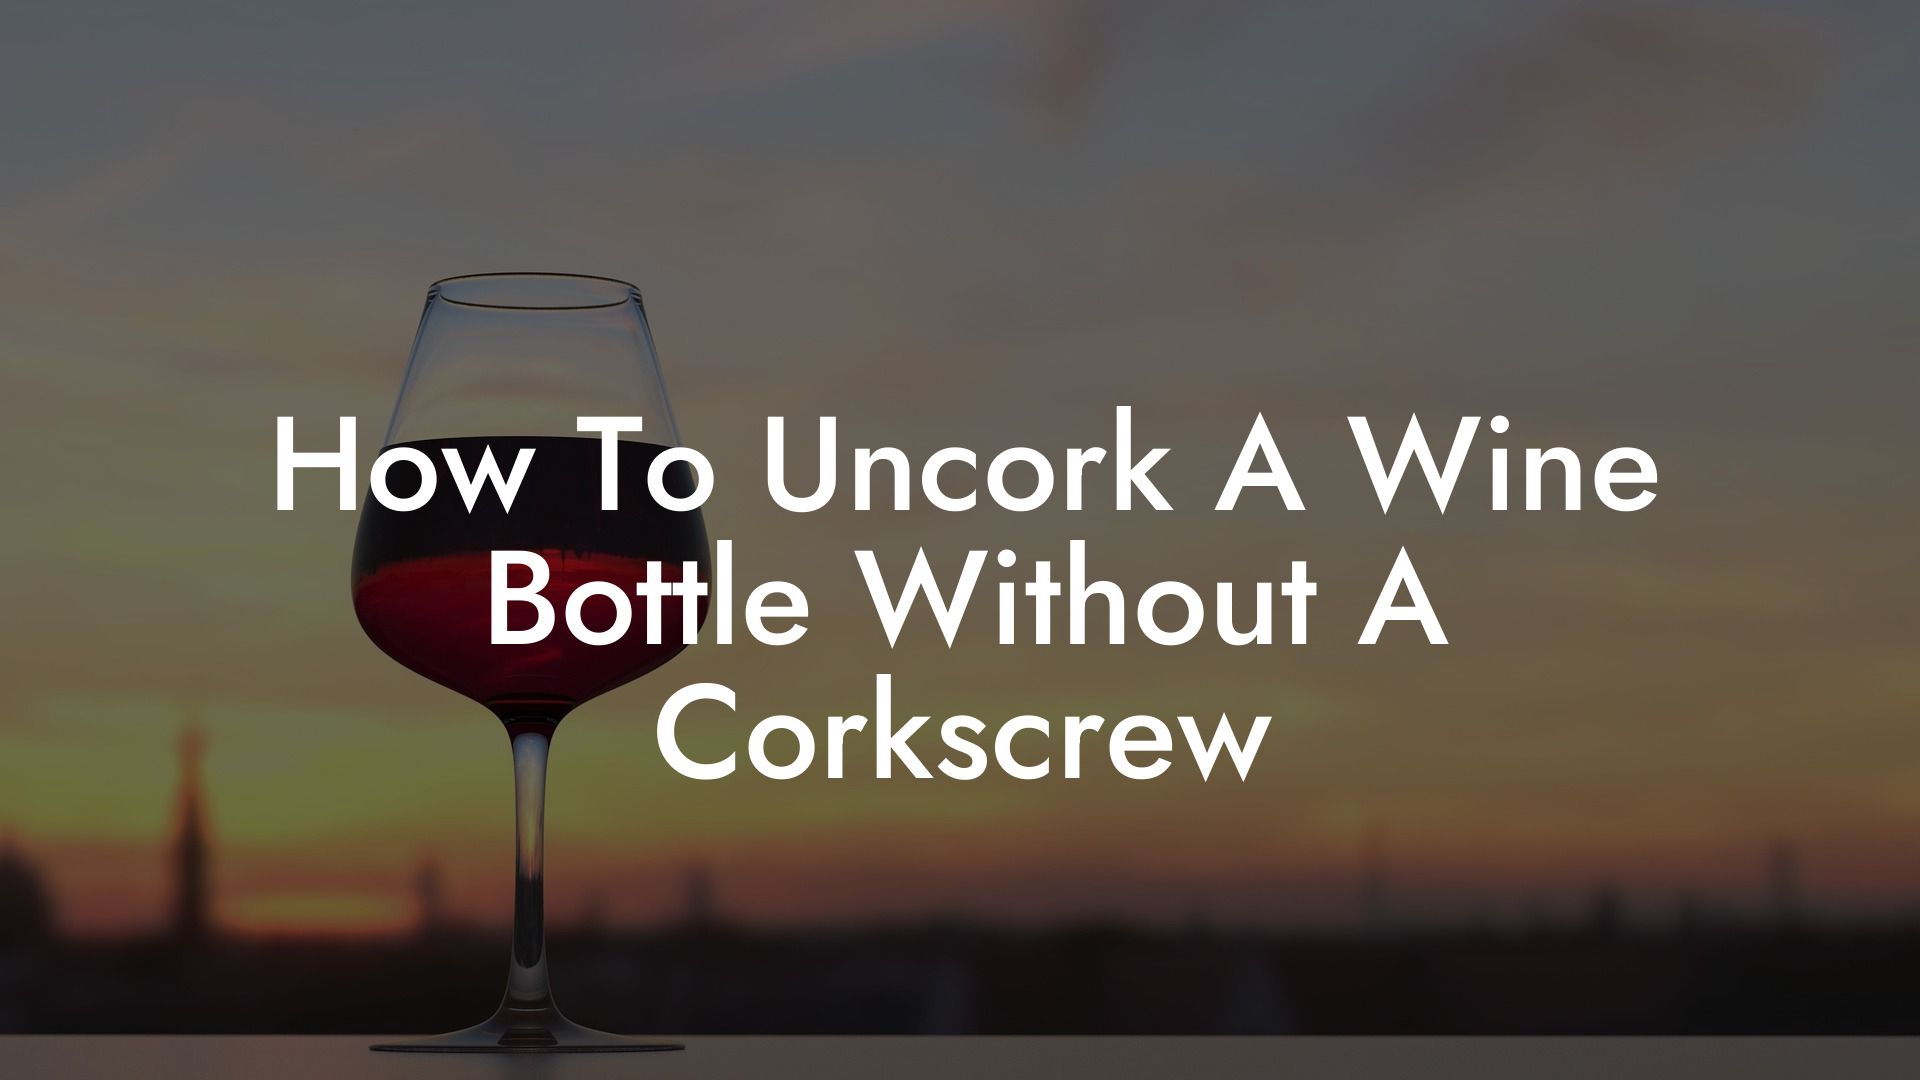 How To Uncork A Wine Bottle Without A Corkscrew